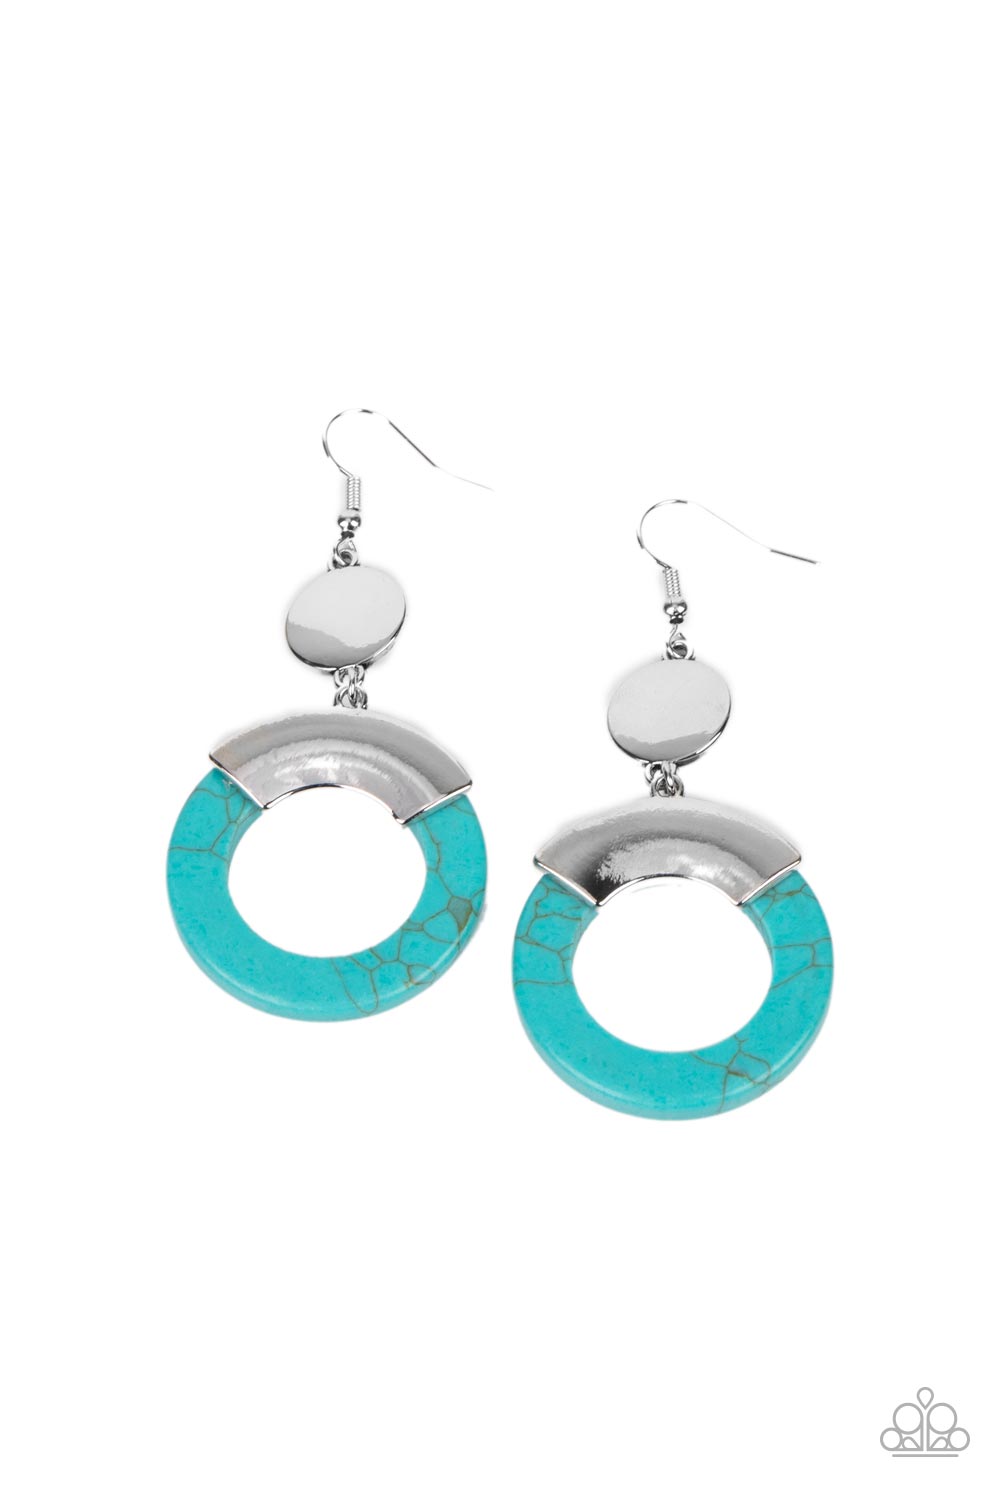 Paparazzi ENTRADA at Your Own Risk - Blue Earrings - A Finishing Touch Jewelry